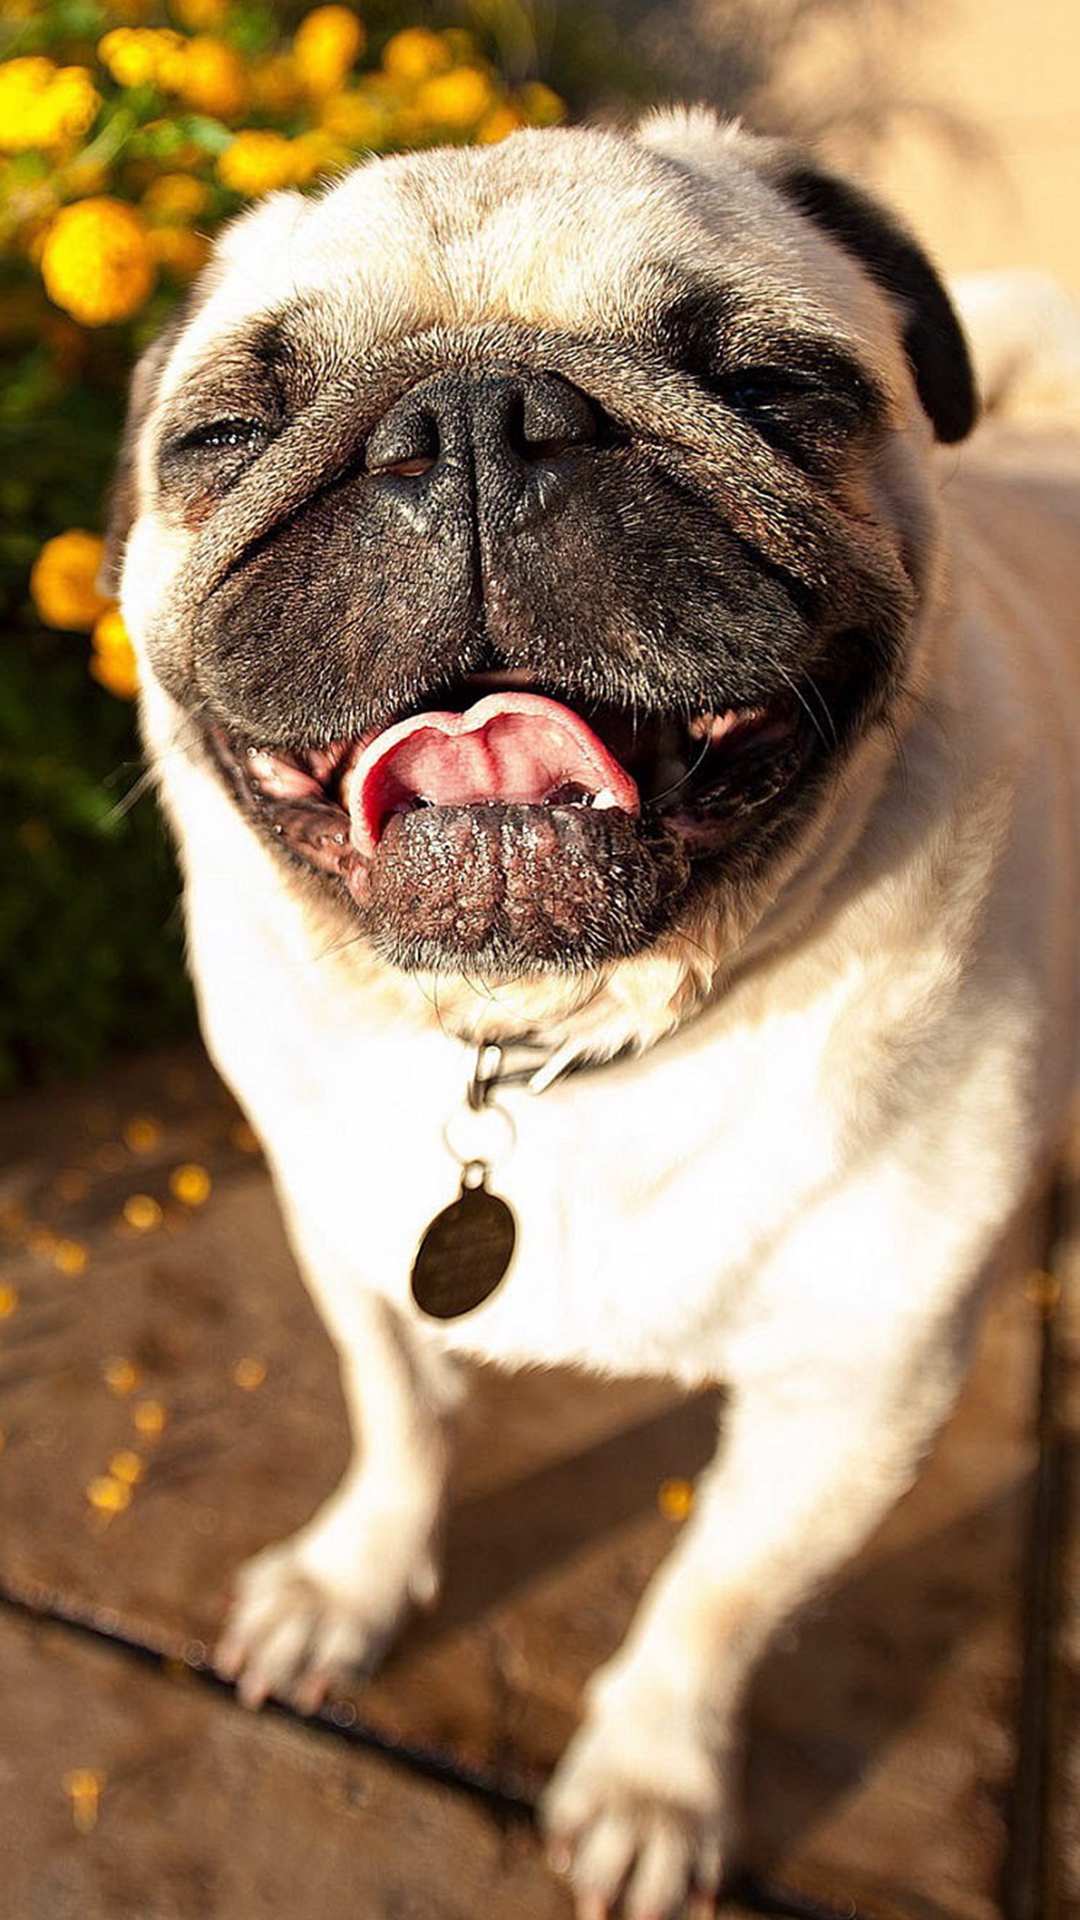 Cute Pug Dog Laughing iPhone 8 Wallpaper Free Download